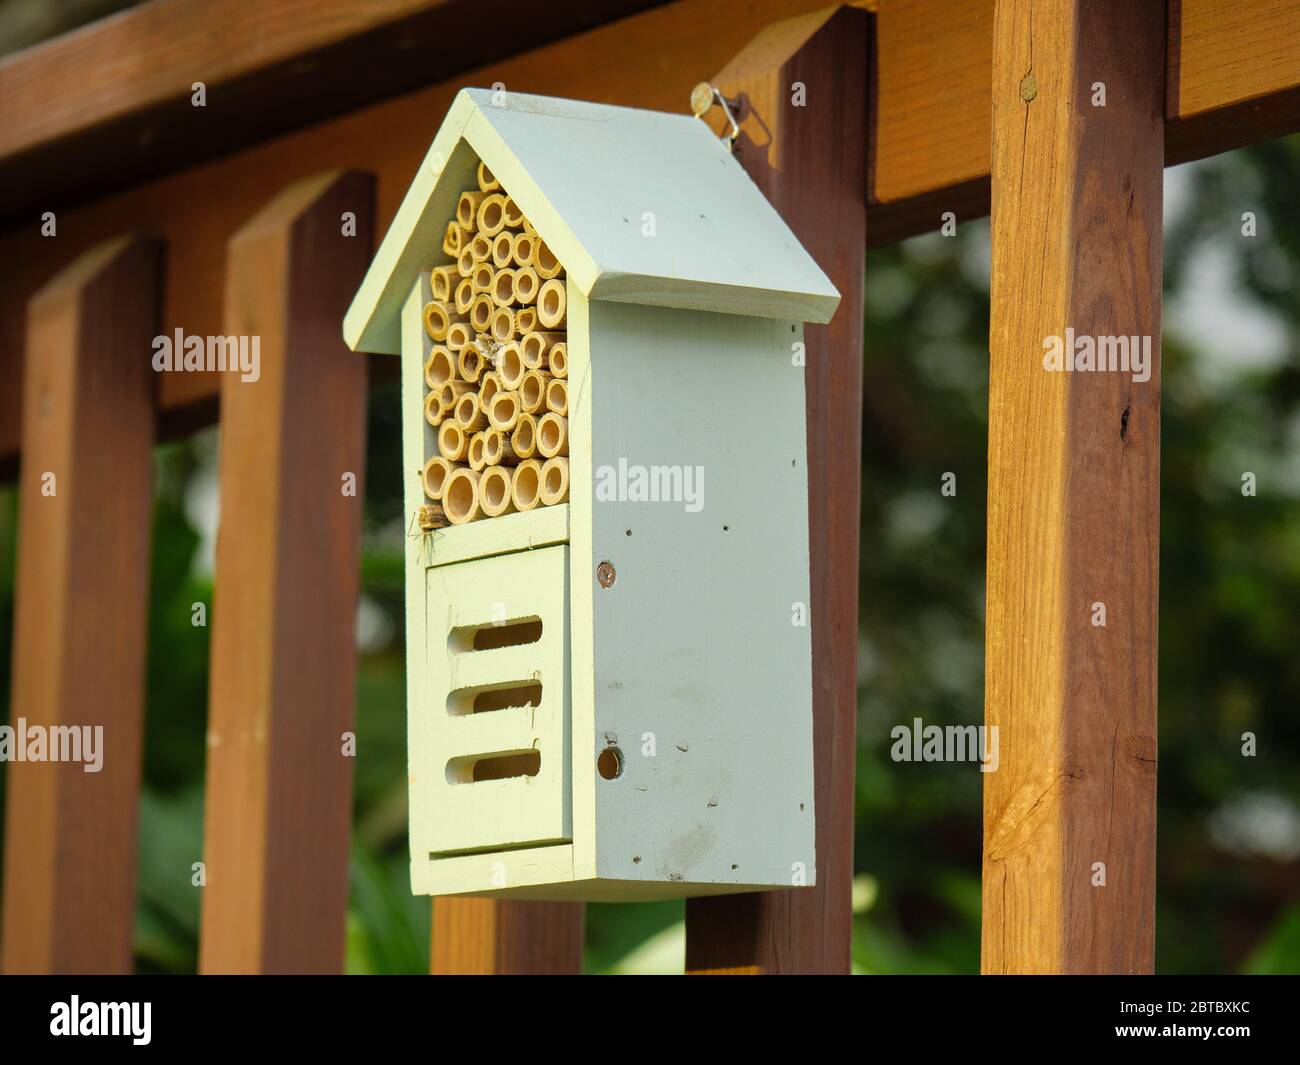 Bee and pollinator house. Provides nesting cavities for solitary bees and hiding place for polllinators. Stock Photo